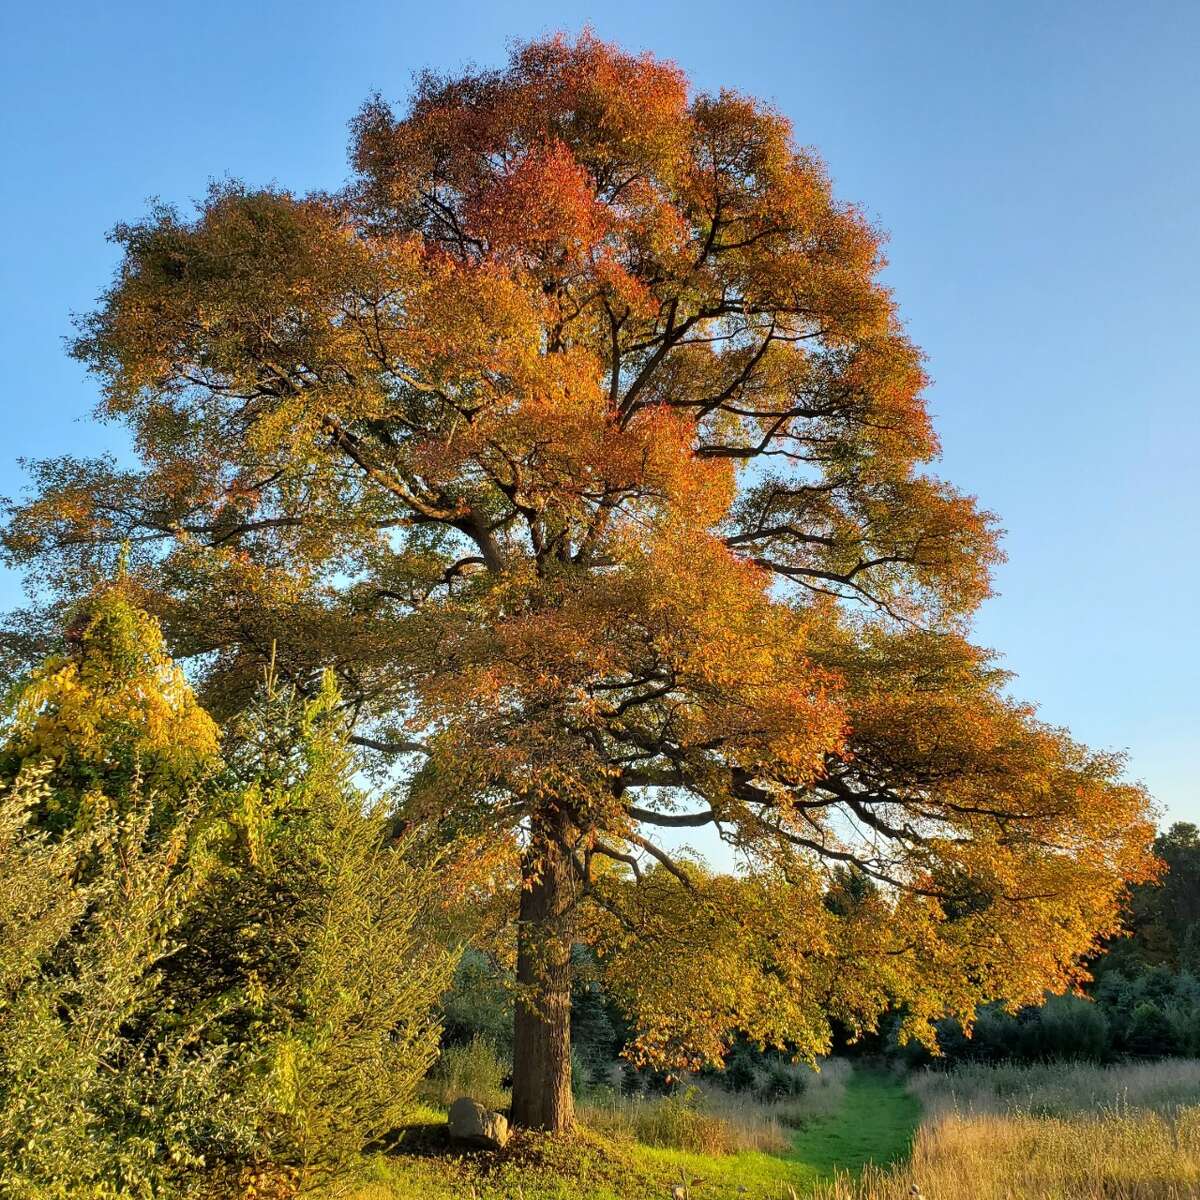 This black tupelo tree, which sits on 25 acres of open space owned by the Wells Family, is now officially listed with the Connecticut Notable Trees Project. It is the third largest black tupelo in Connecticut.